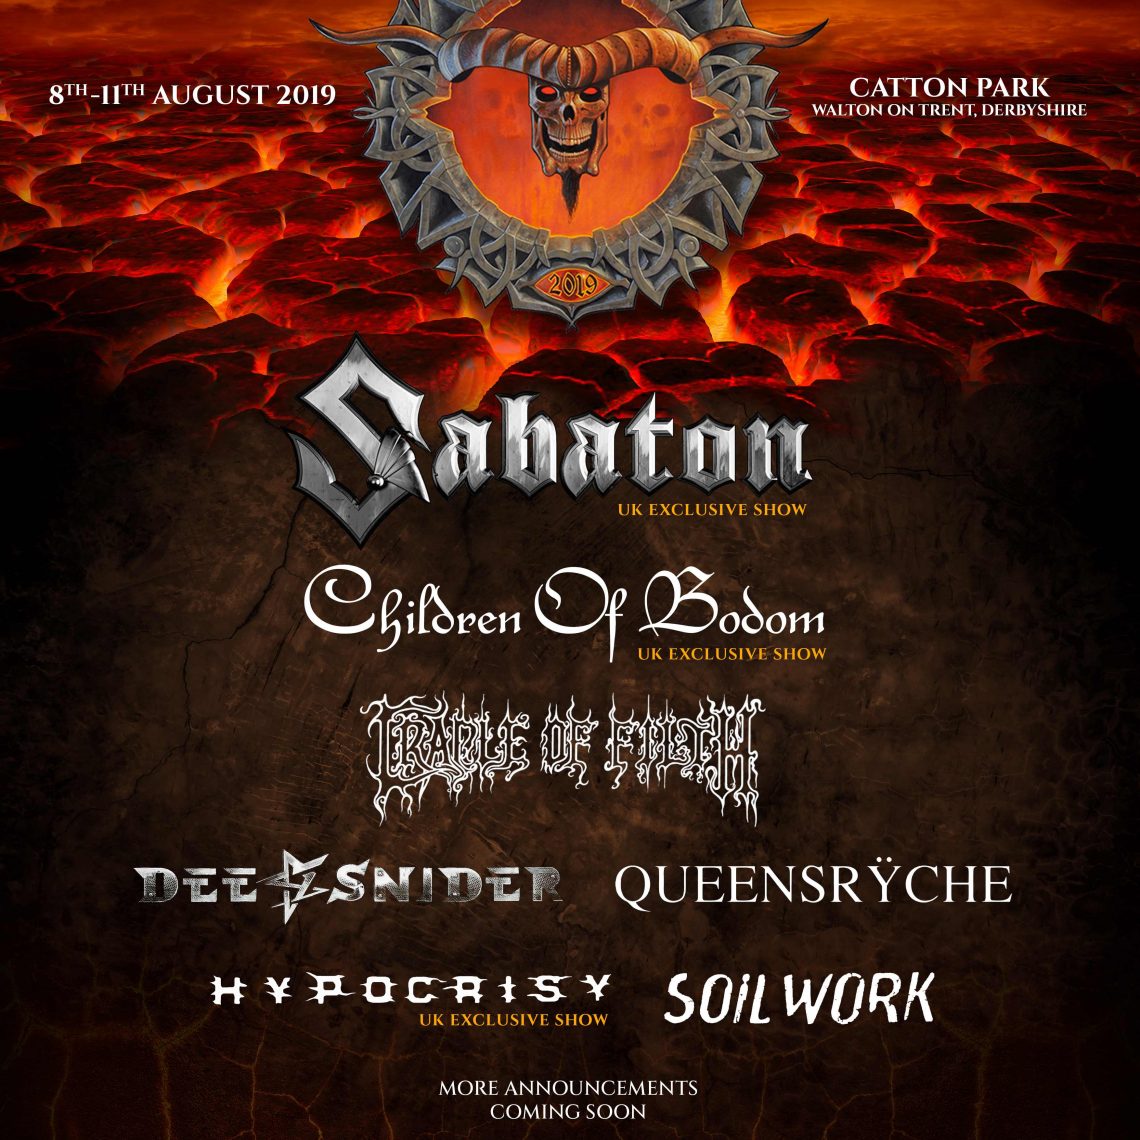 BLOODSTOCK announce 6 bands as an early Halloween treat!